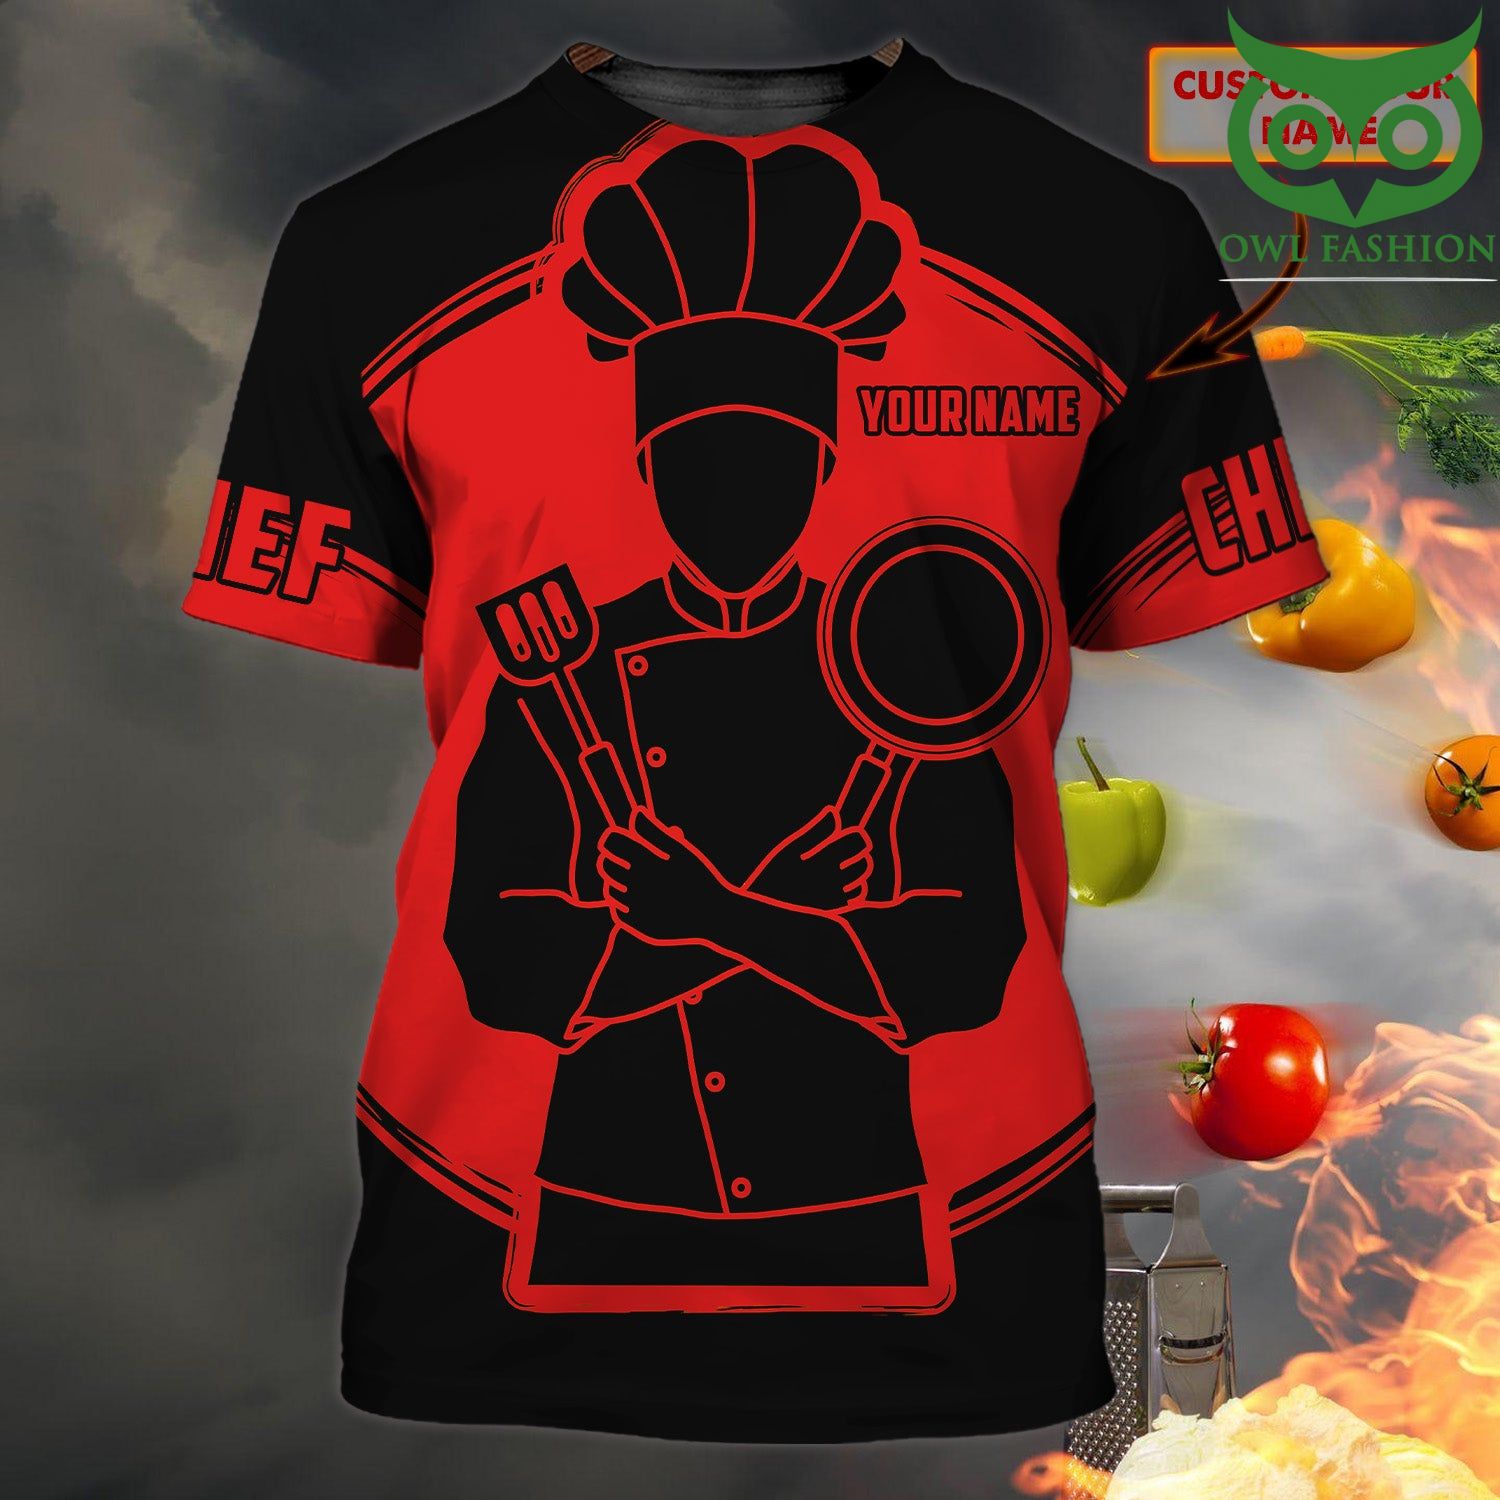 115 CHEF red and black shape Personalized Name 3D Tshirt